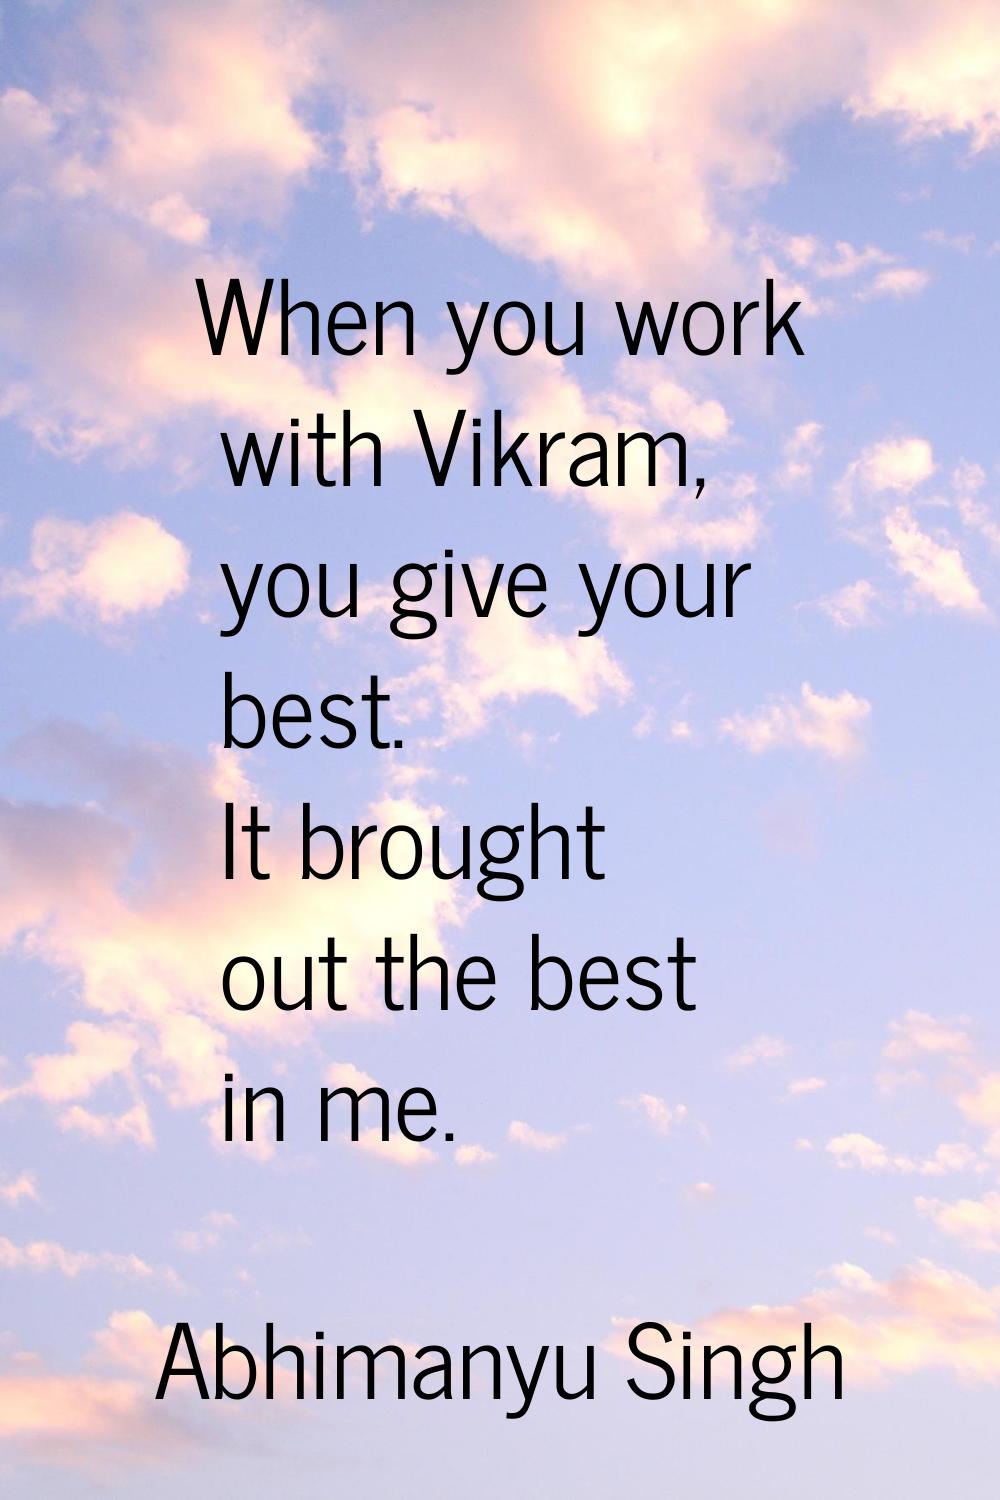 When you work with Vikram, you give your best. It brought out the best in me.